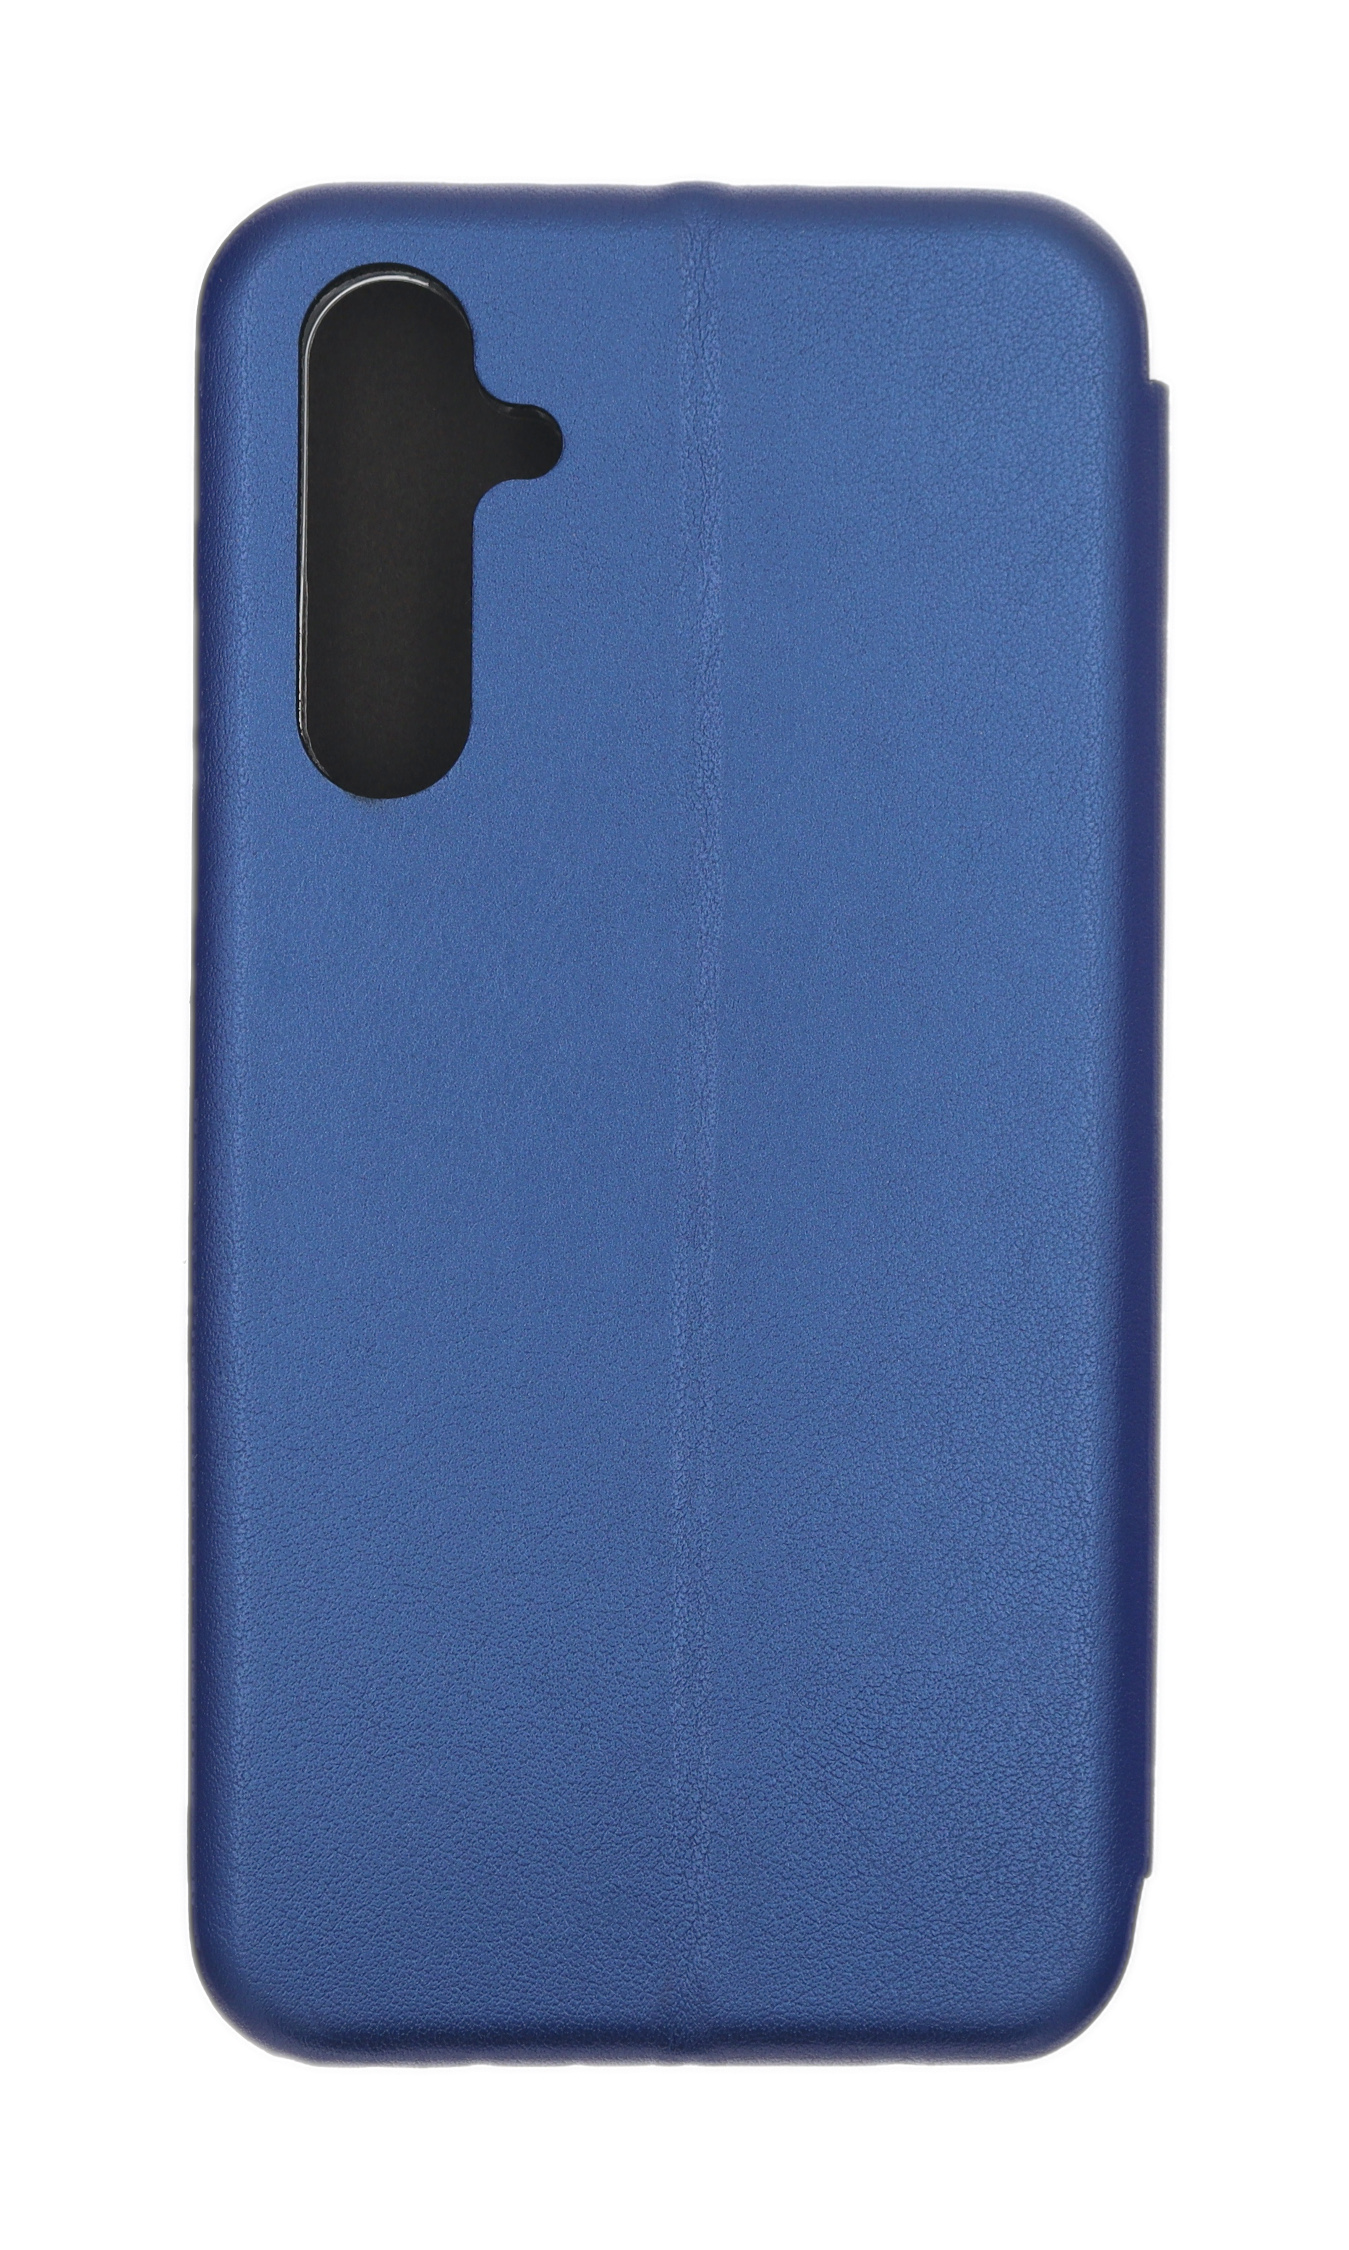 Bookcase A54 Samsung, Bookcover, Marineblau JAMCOVER Rounded, Galaxy 5G,